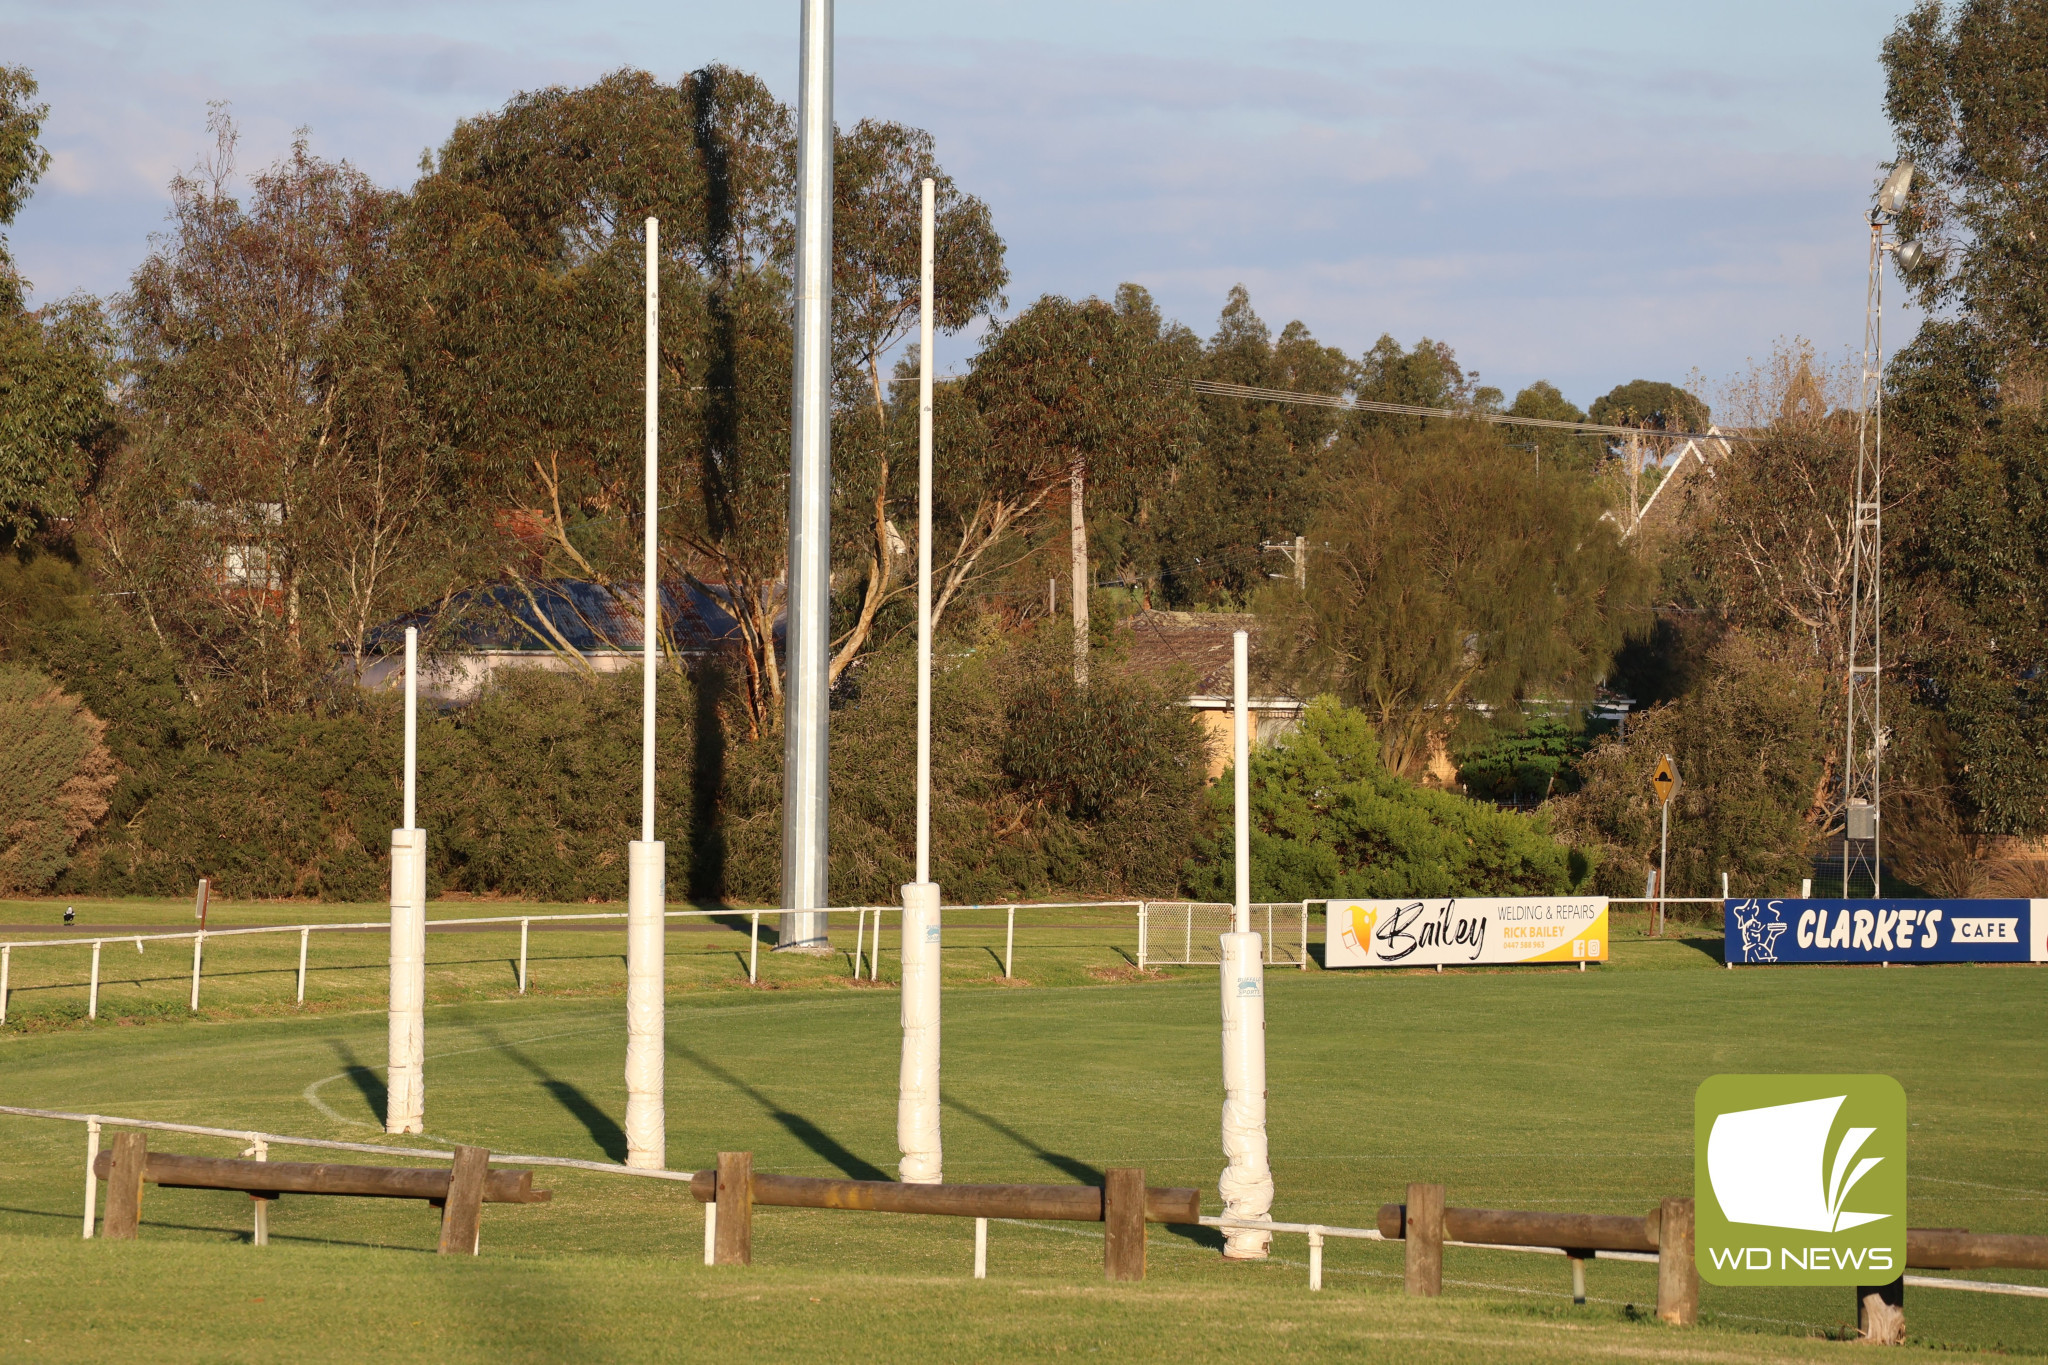 Have your say: Funding has flowed in a contentious draft budget vote at this week’s Moyne Shire Council special meeting. Mortlake’s DC Farran Oval and Montgomery Pavilion, and Woorndoo Recreation Reserve have all received a potential funding commitment.